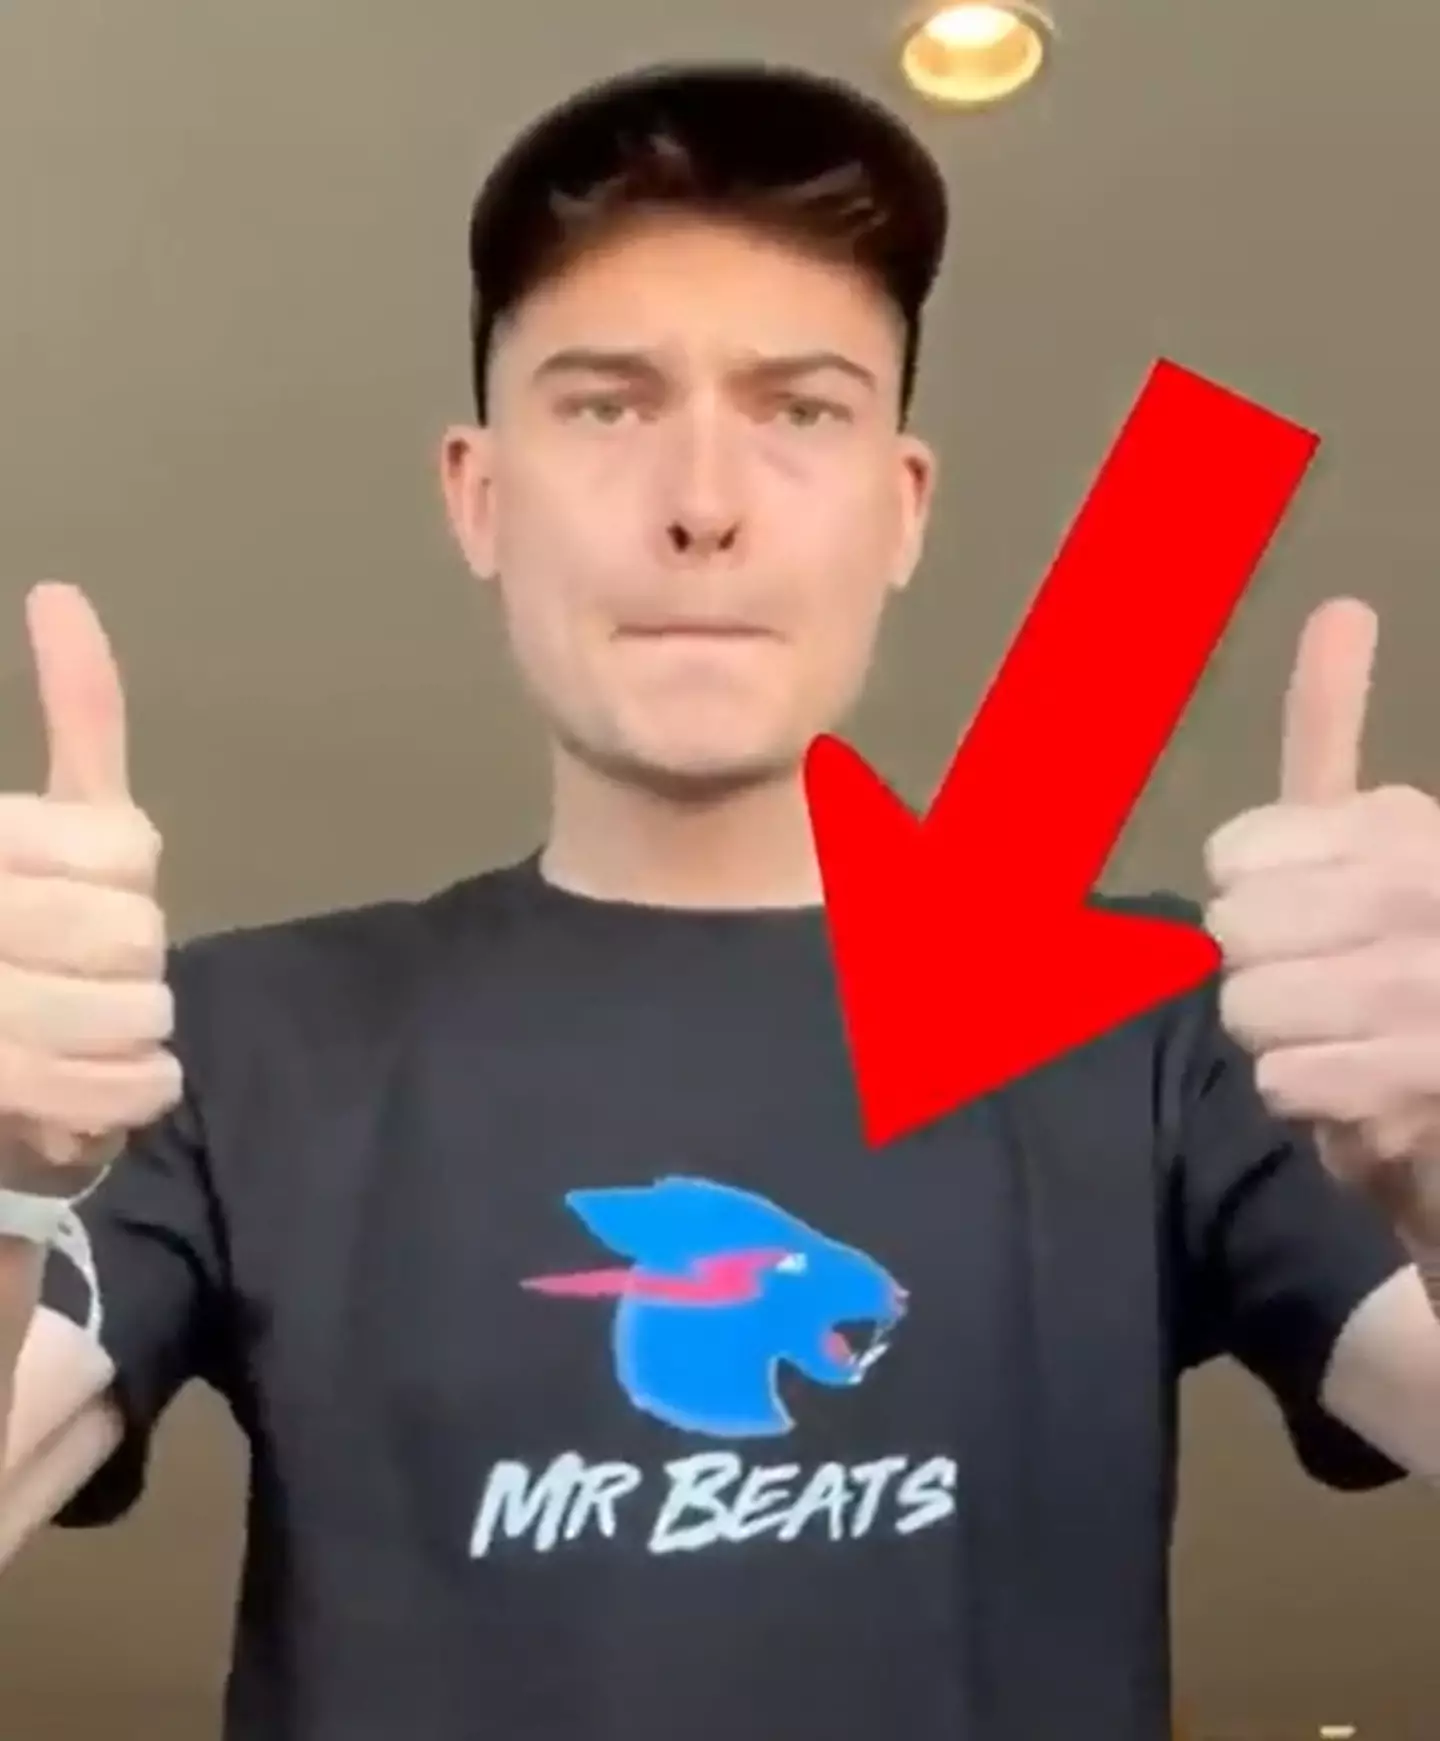 One YouTuber made enough to pay off his mortgage with fake Mr Beast merchandise.